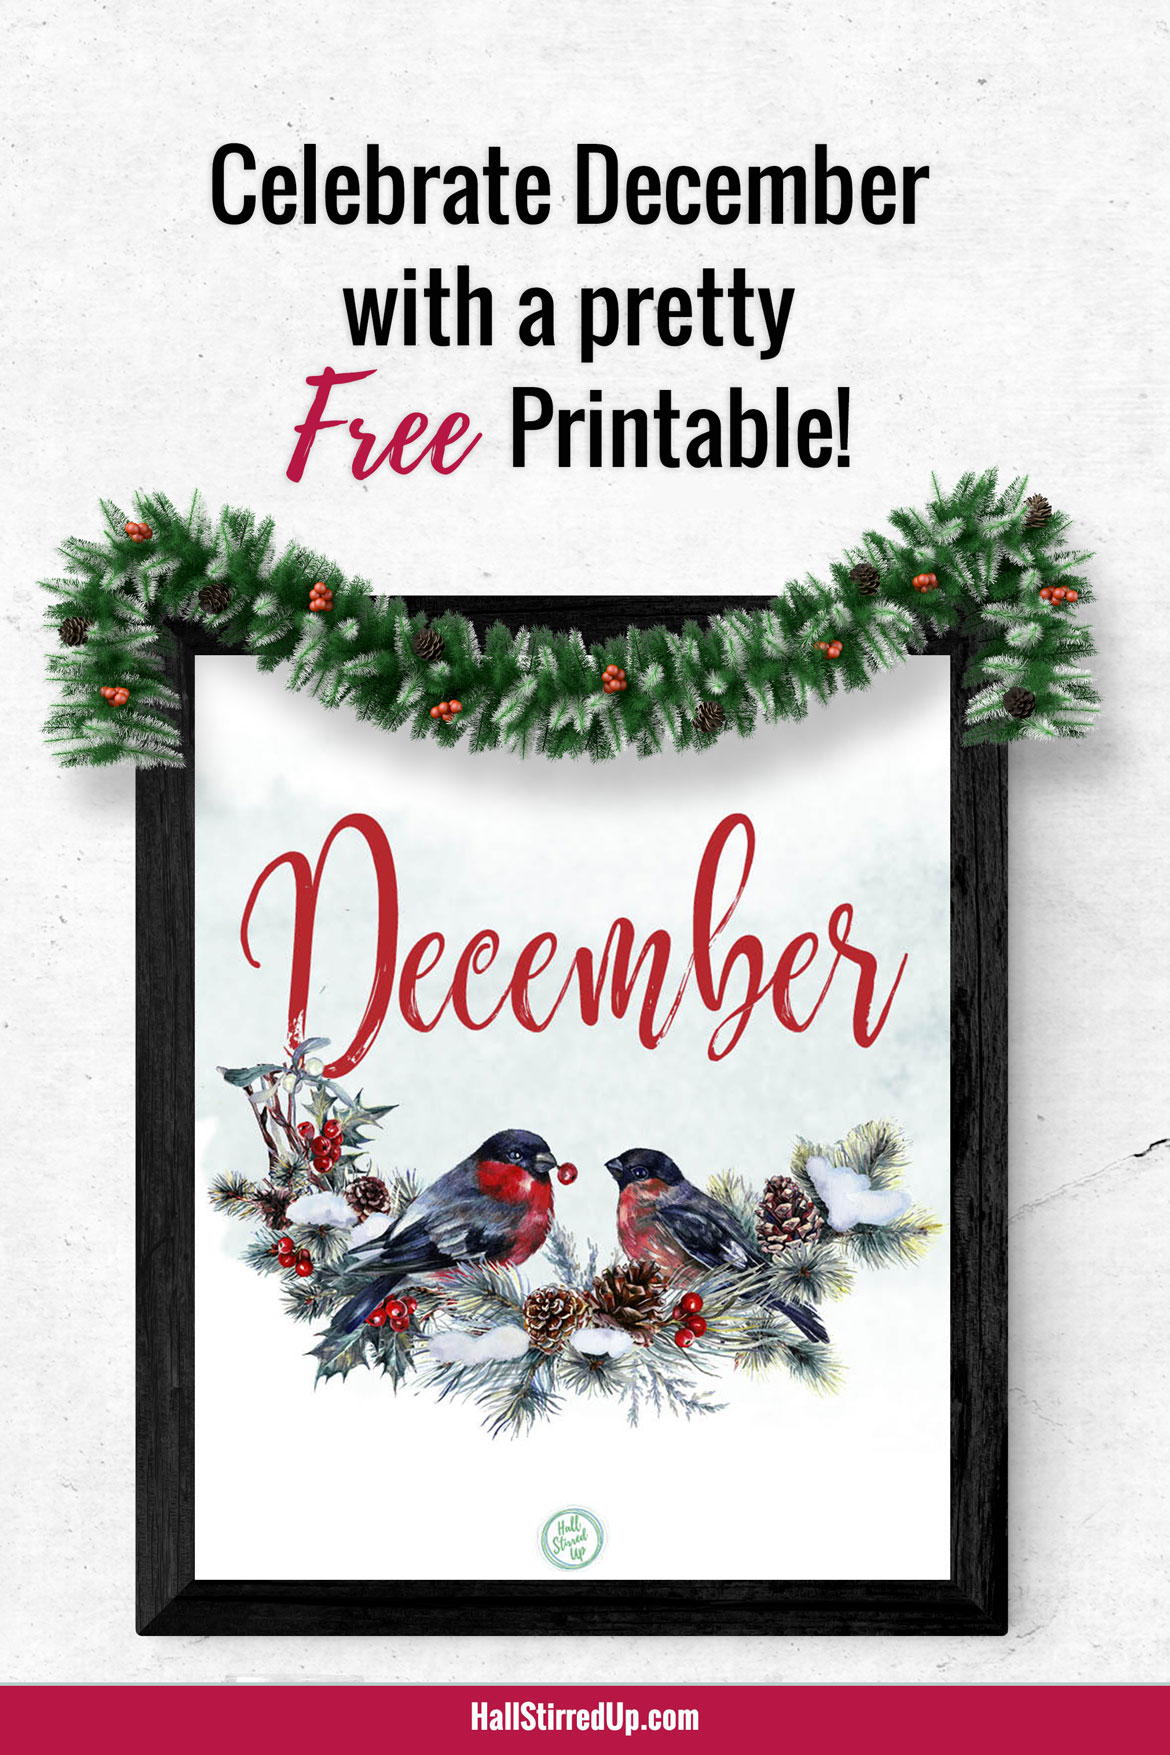 December is here with a pretty free printable